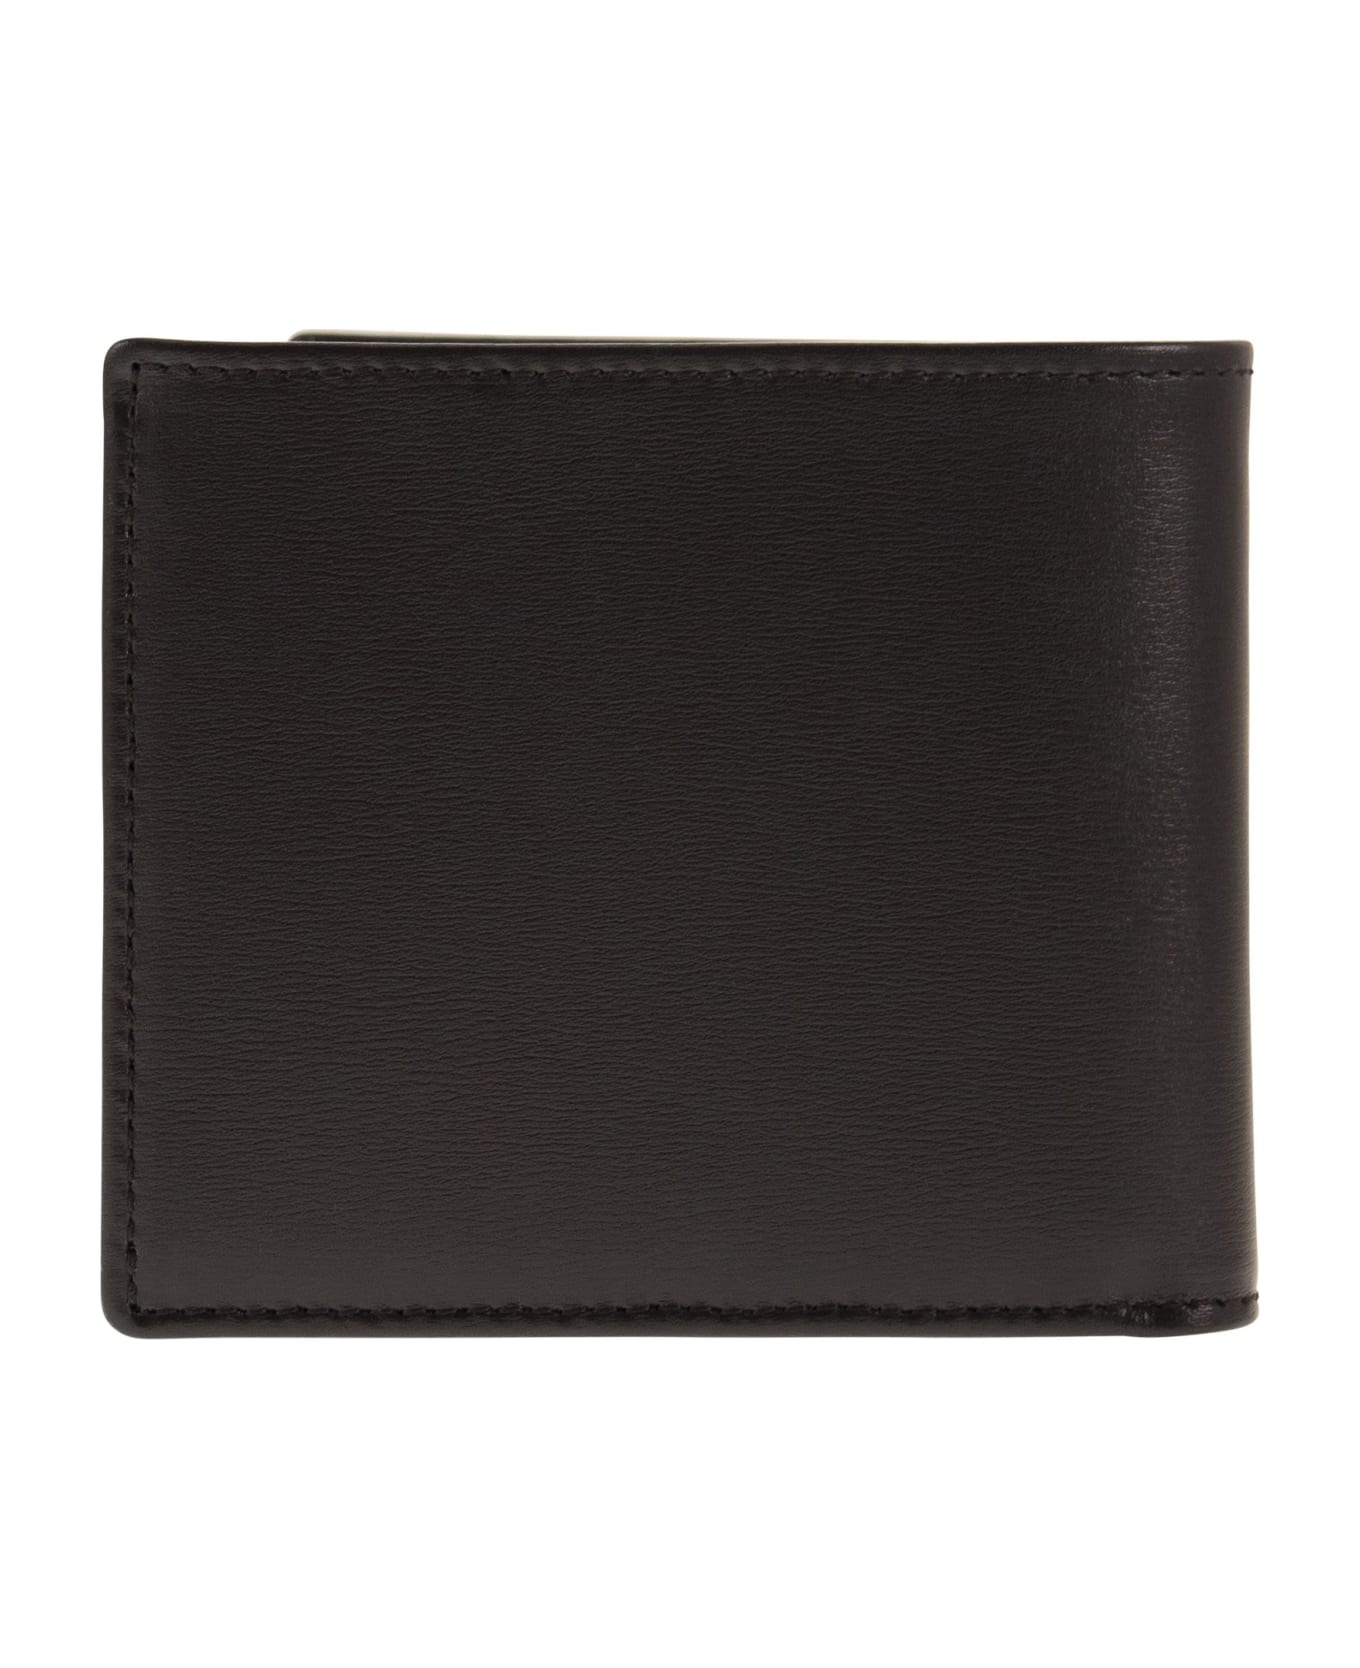 Tod's Leather Wallet With Logo - Dark Brown